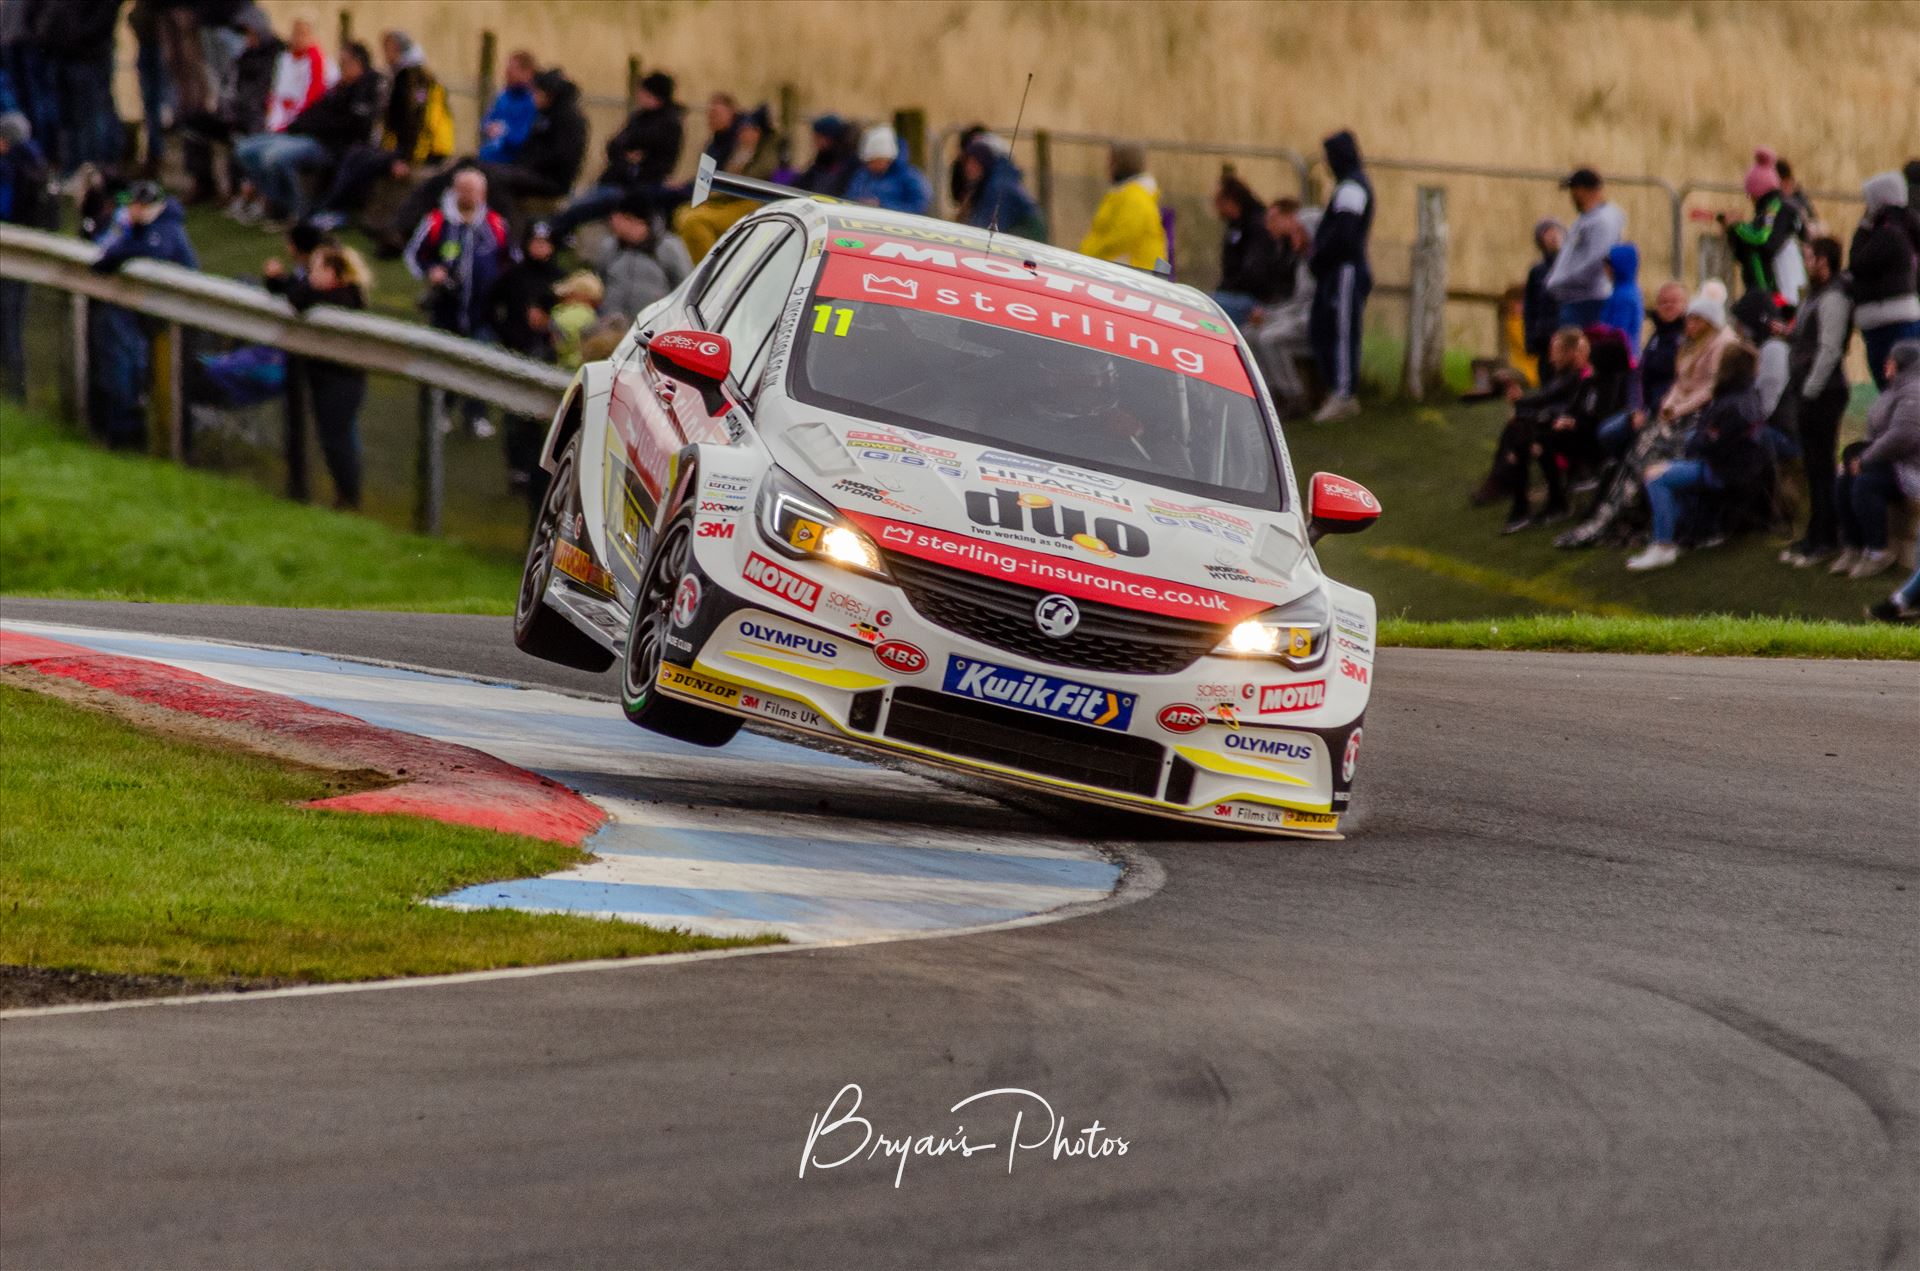 Jason Plato A photograph of Jason Plato getting his Astra on two wheels during qualifying for the 2019 touring cars race at Knockhill racing circuit. (photograph taken from public access area) by Bryans Photos